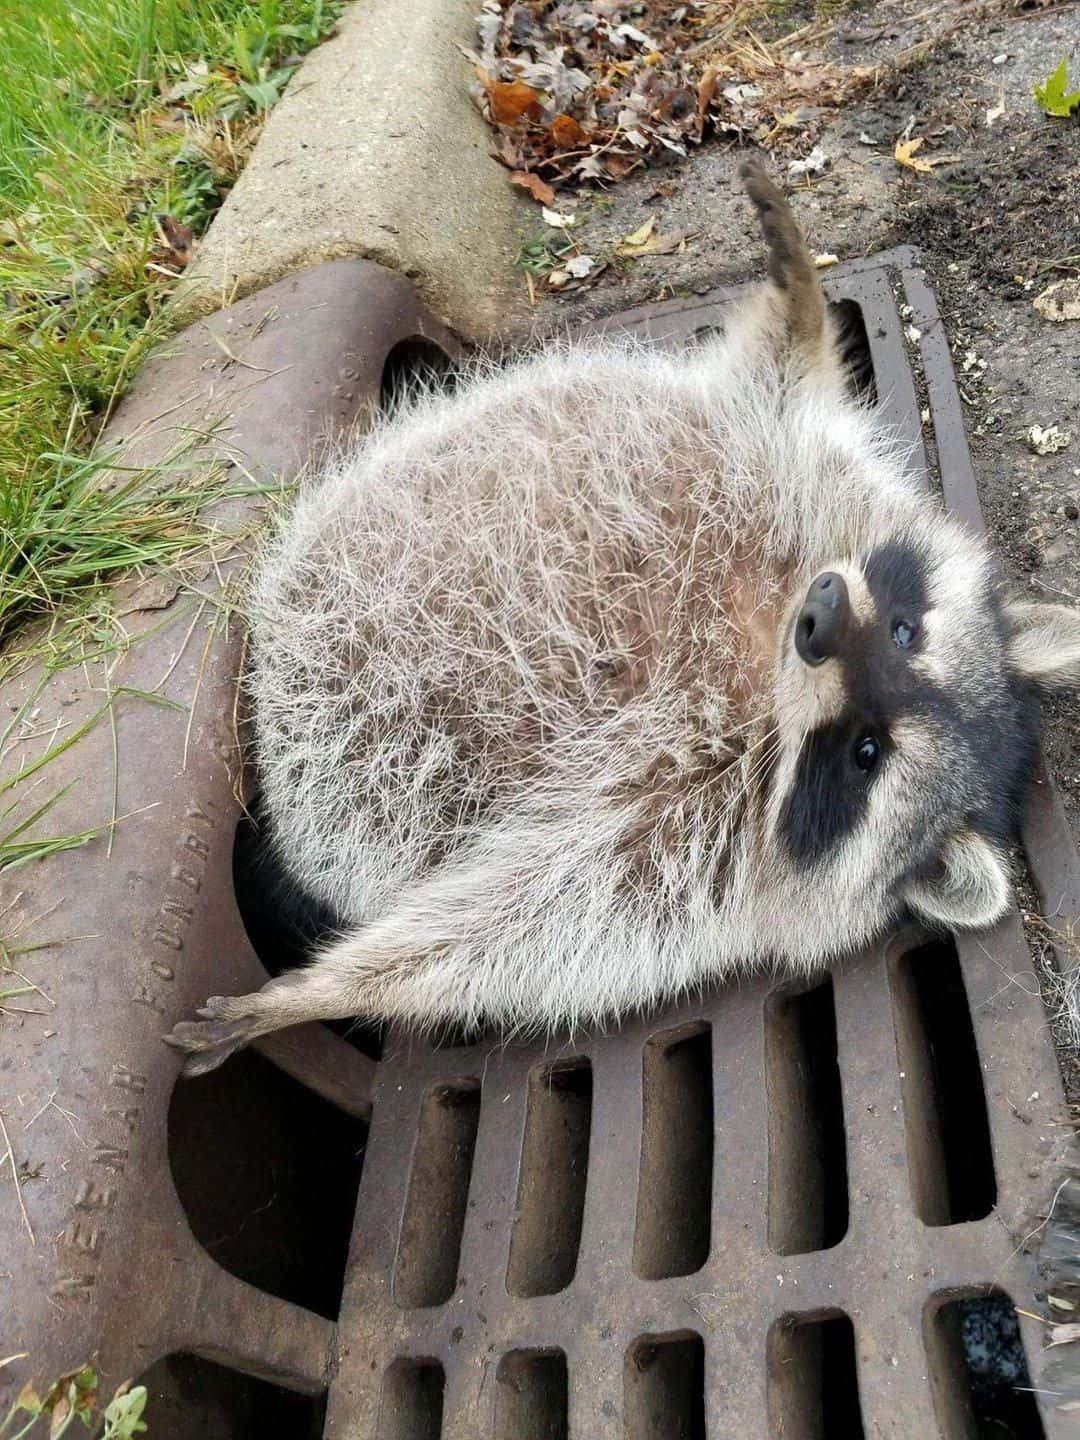 A raccoon searches for food in the middle of the street.